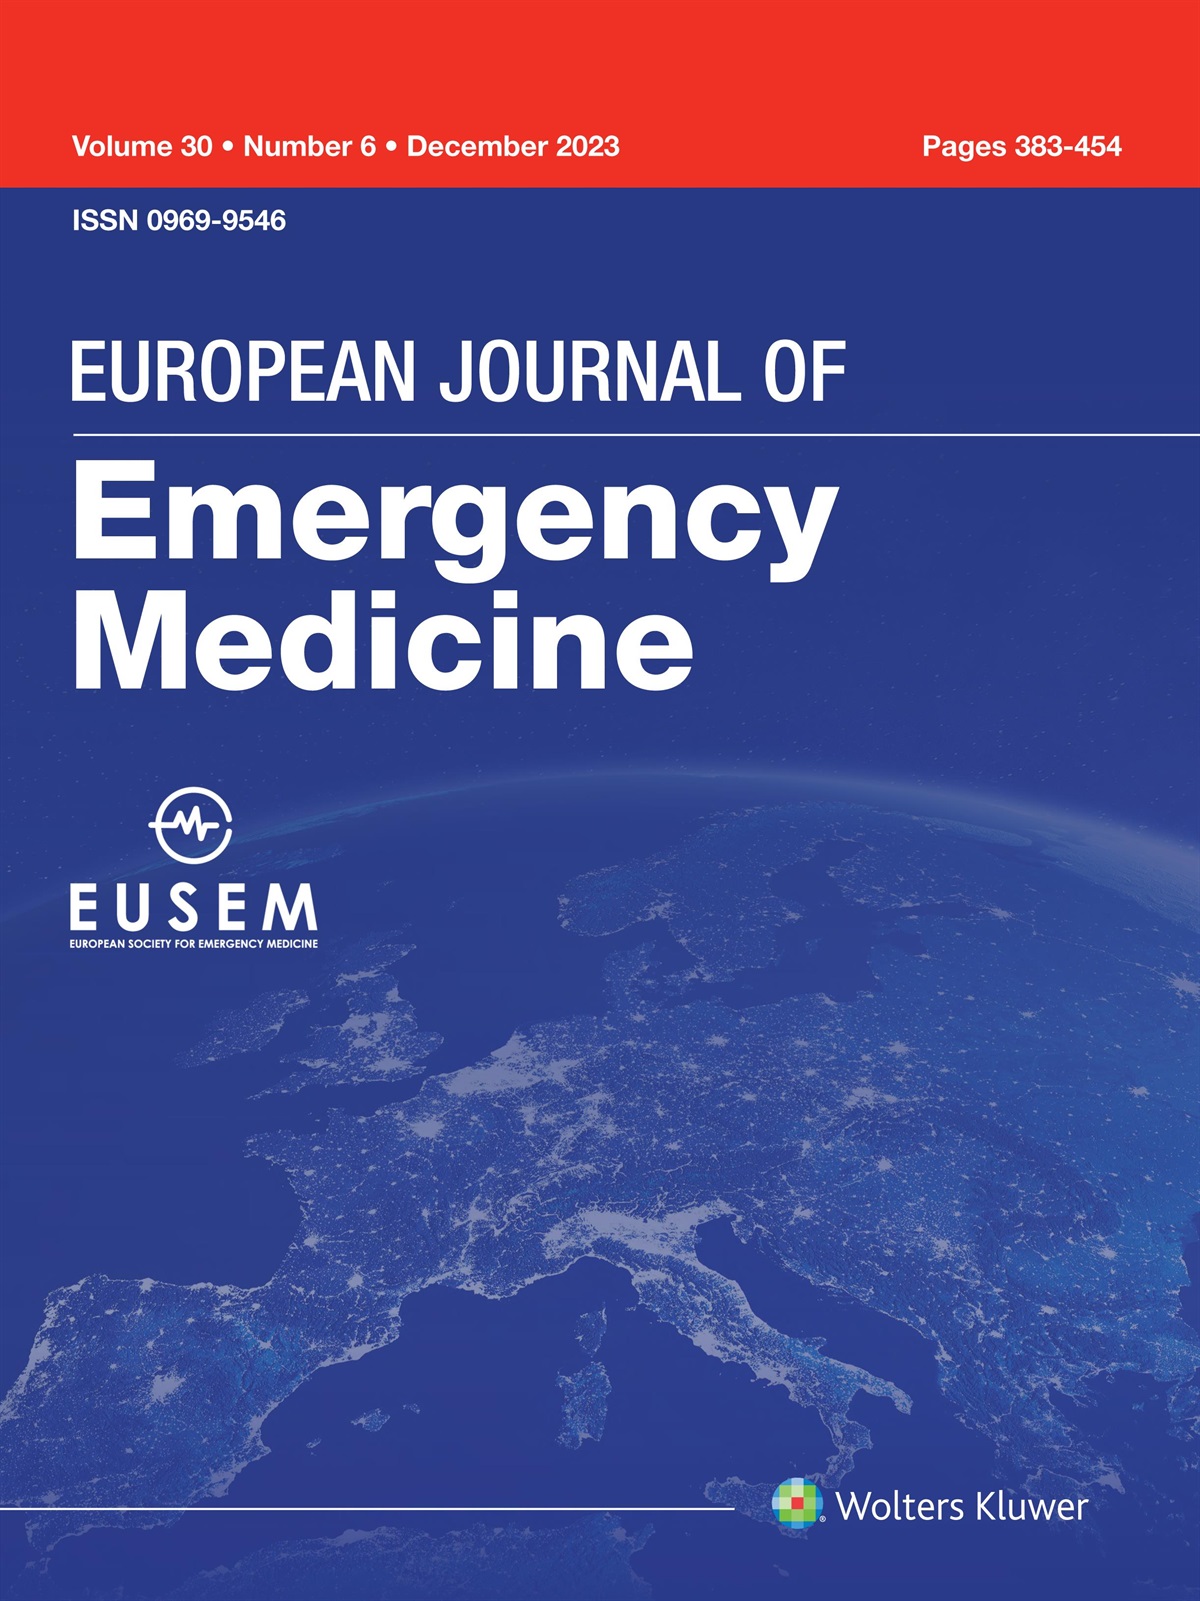 Identifying needs of older patients at the emergency department